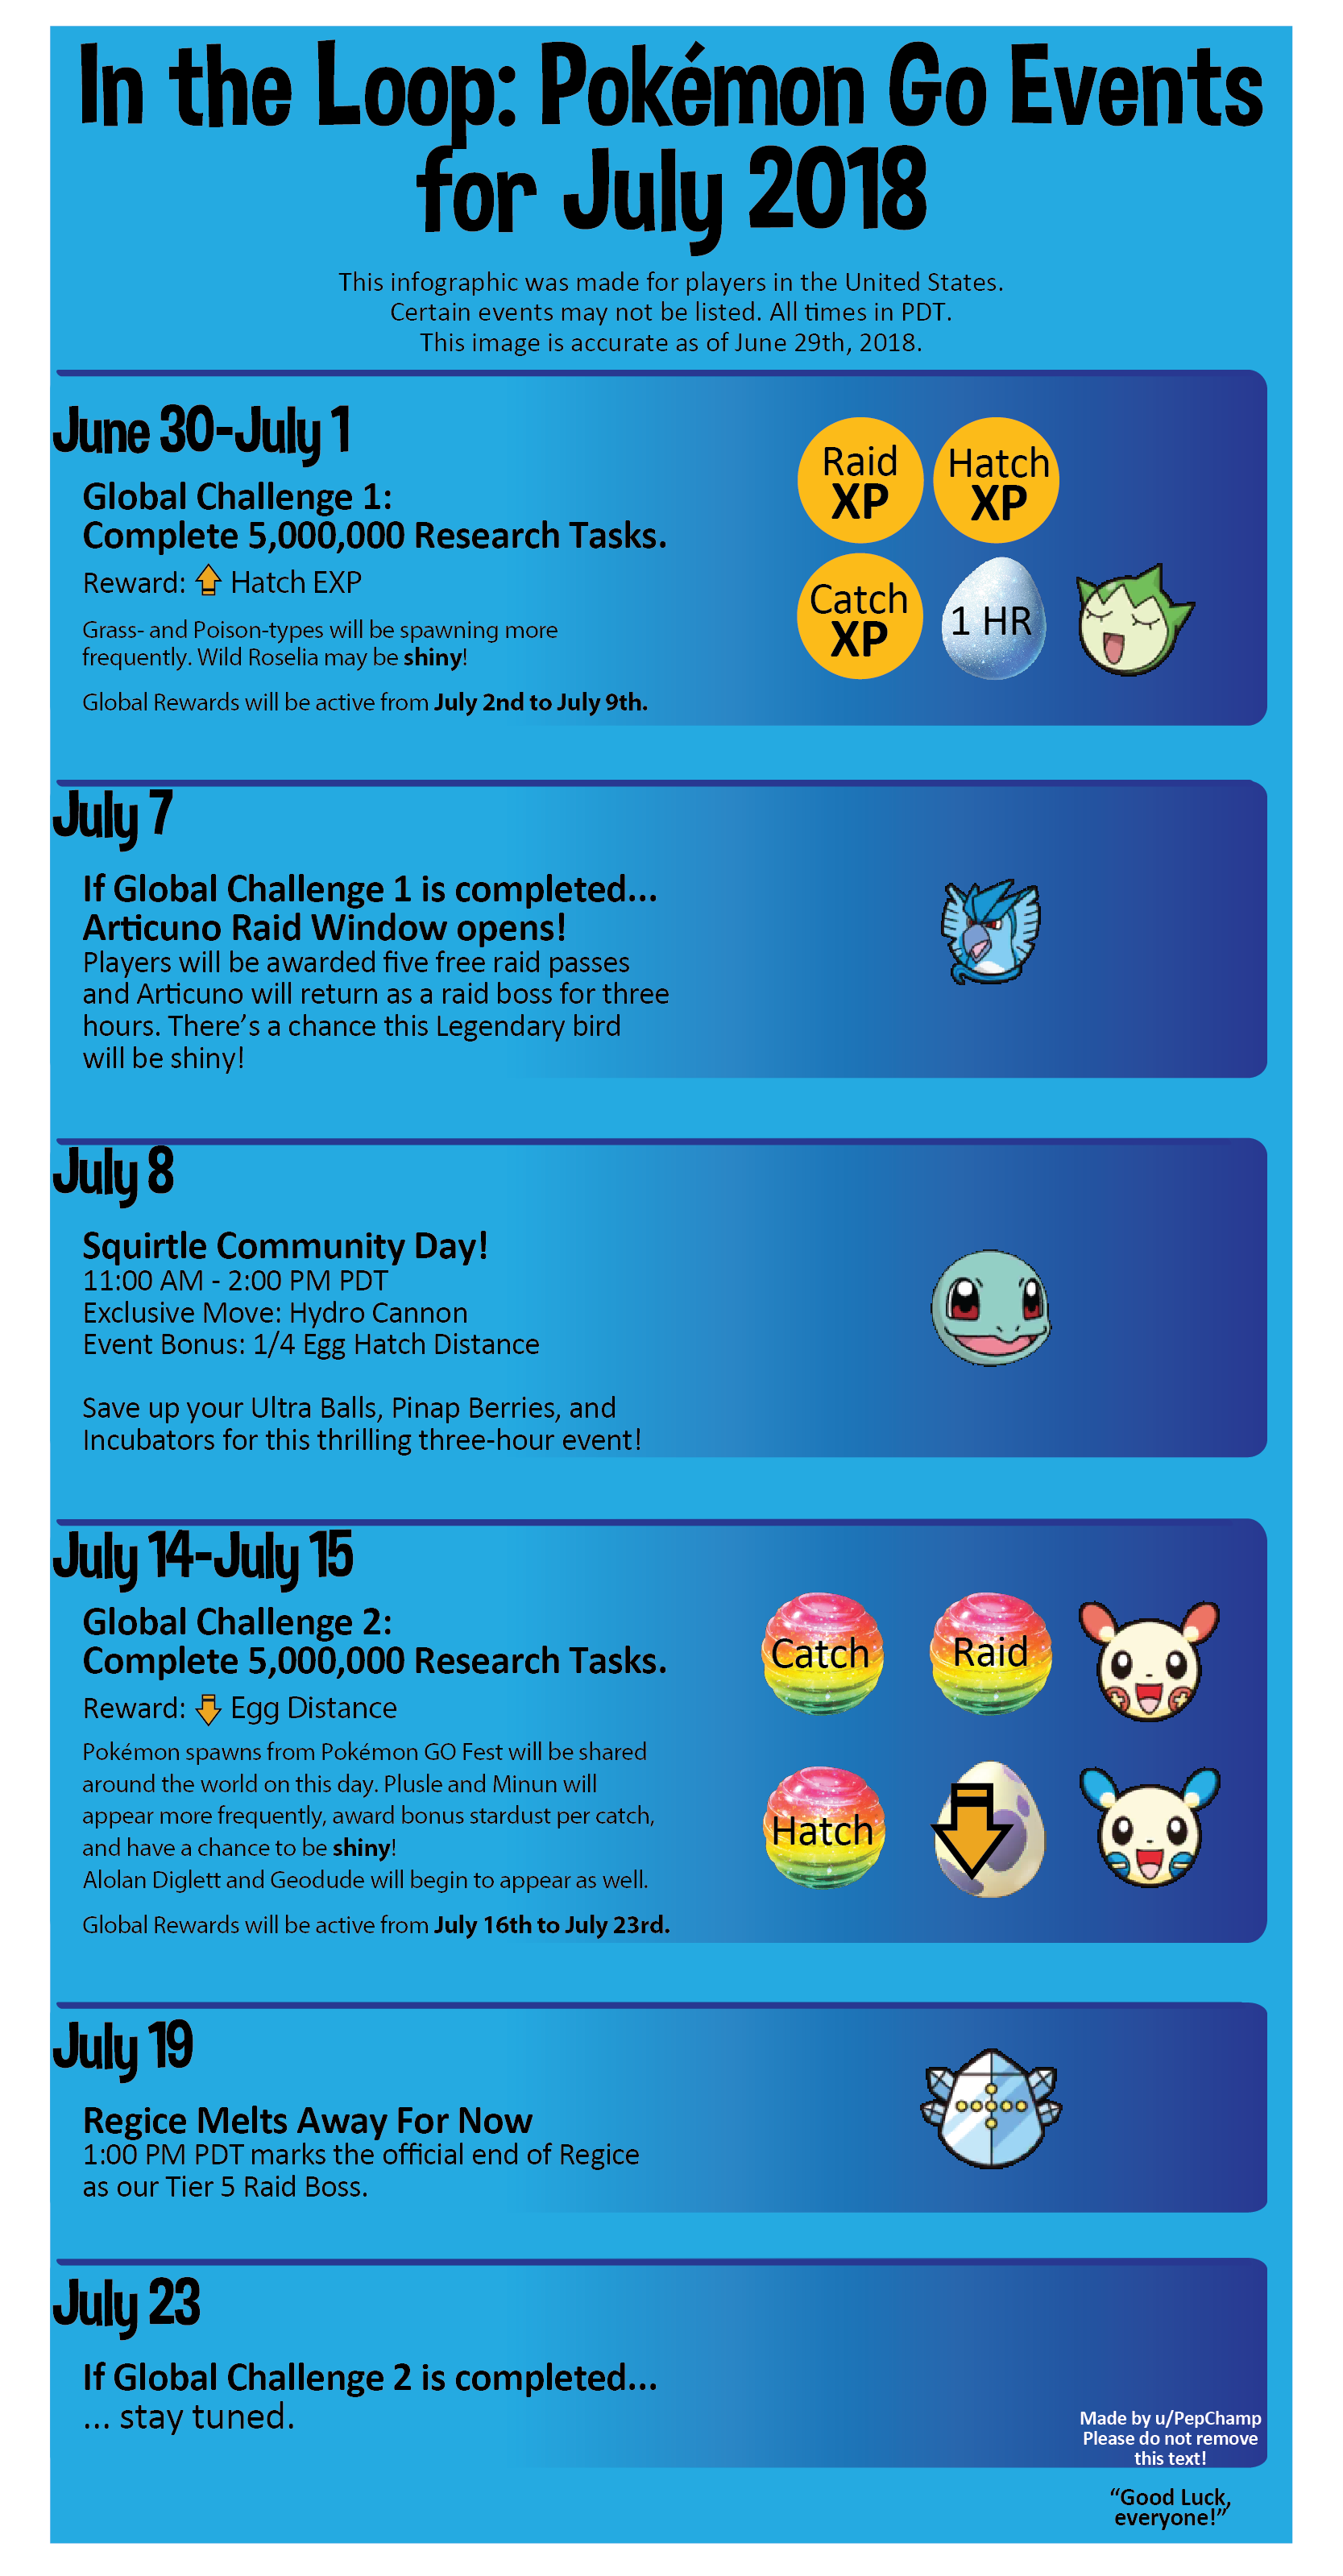 Pokemon GO All Events For July 2018 (United States)